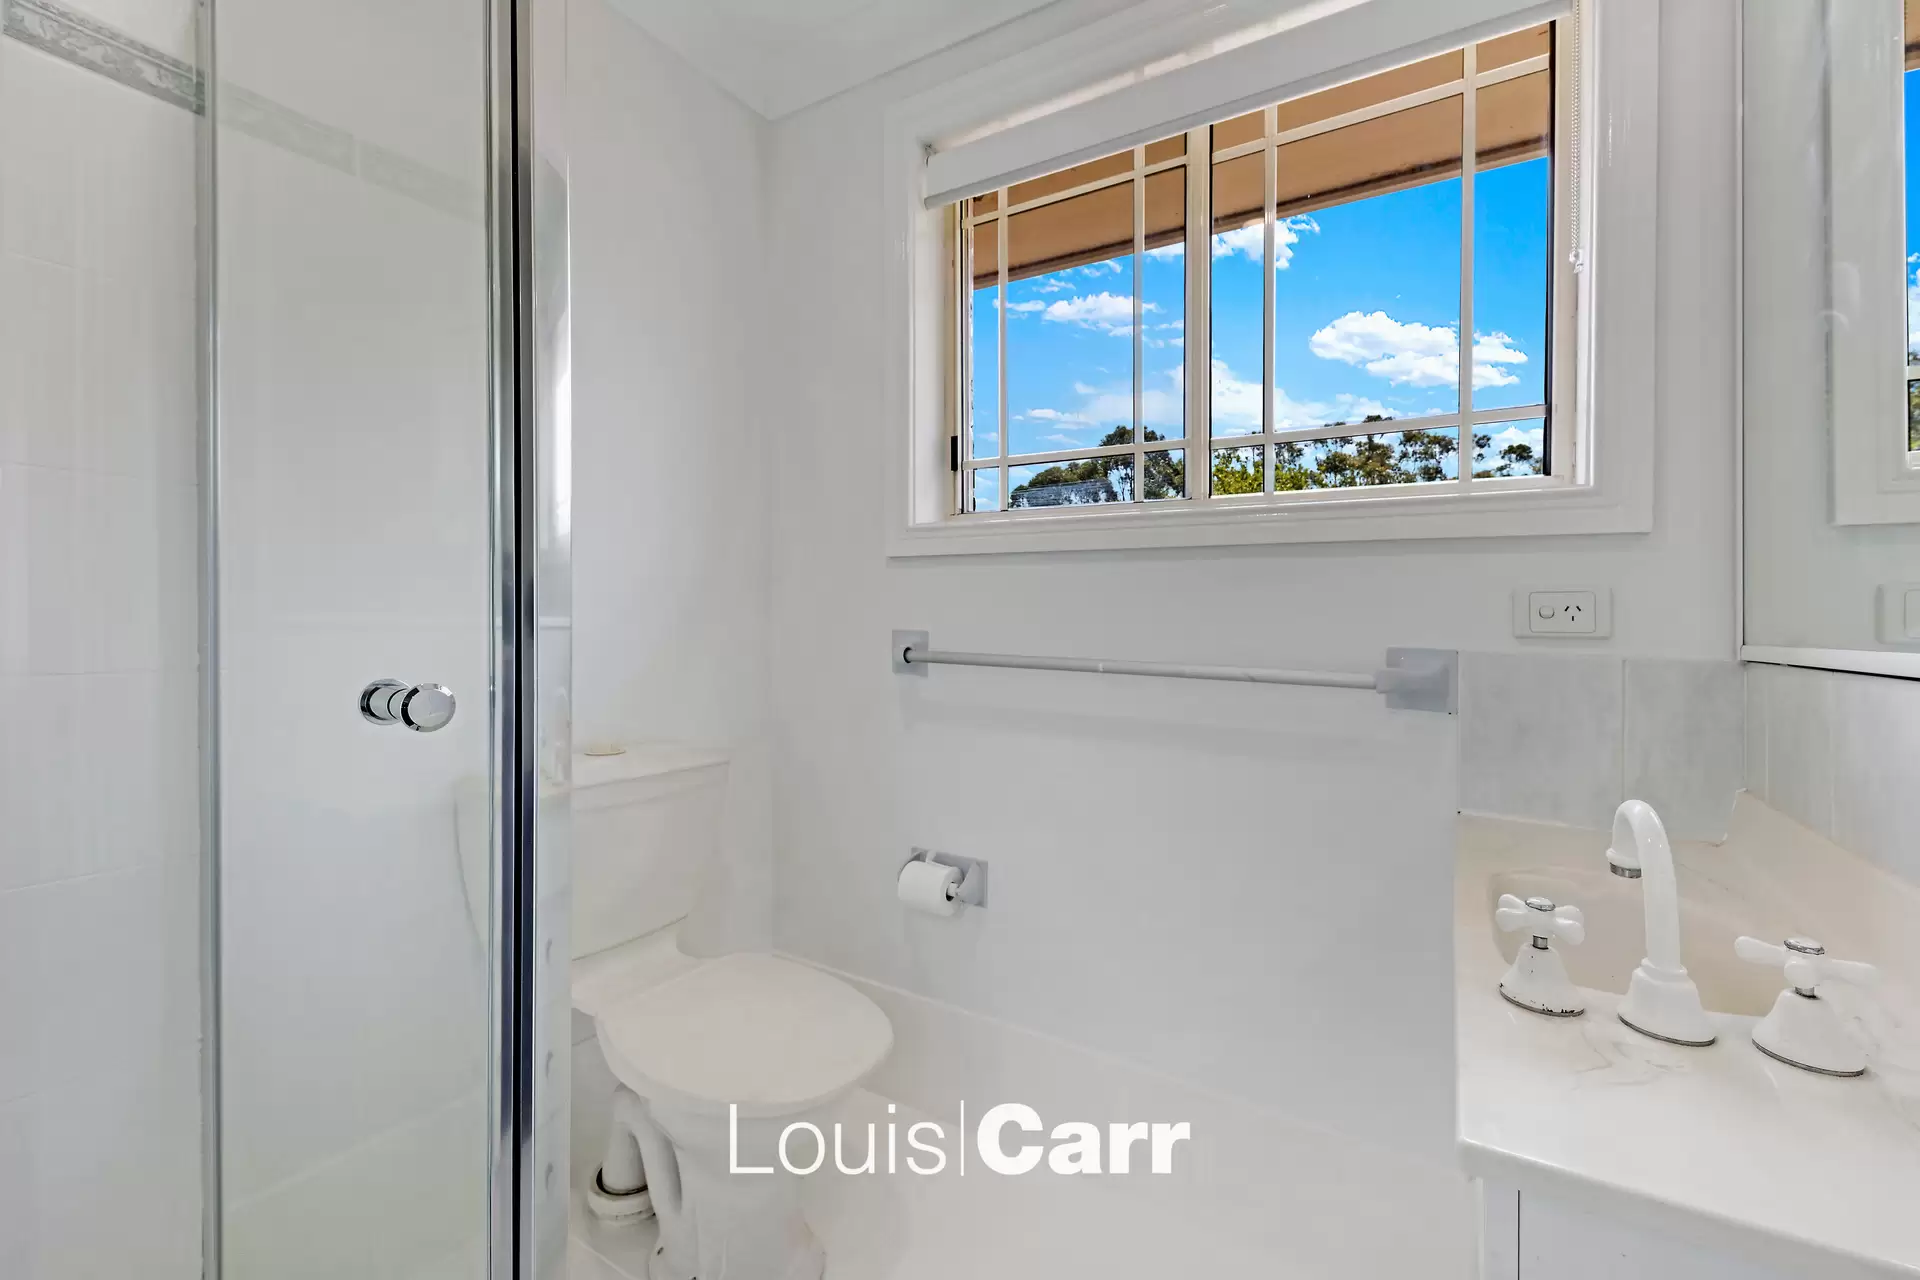 Photo #8: 4 Kingussie Avenue, Castle Hill - Sold by Louis Carr Real Estate